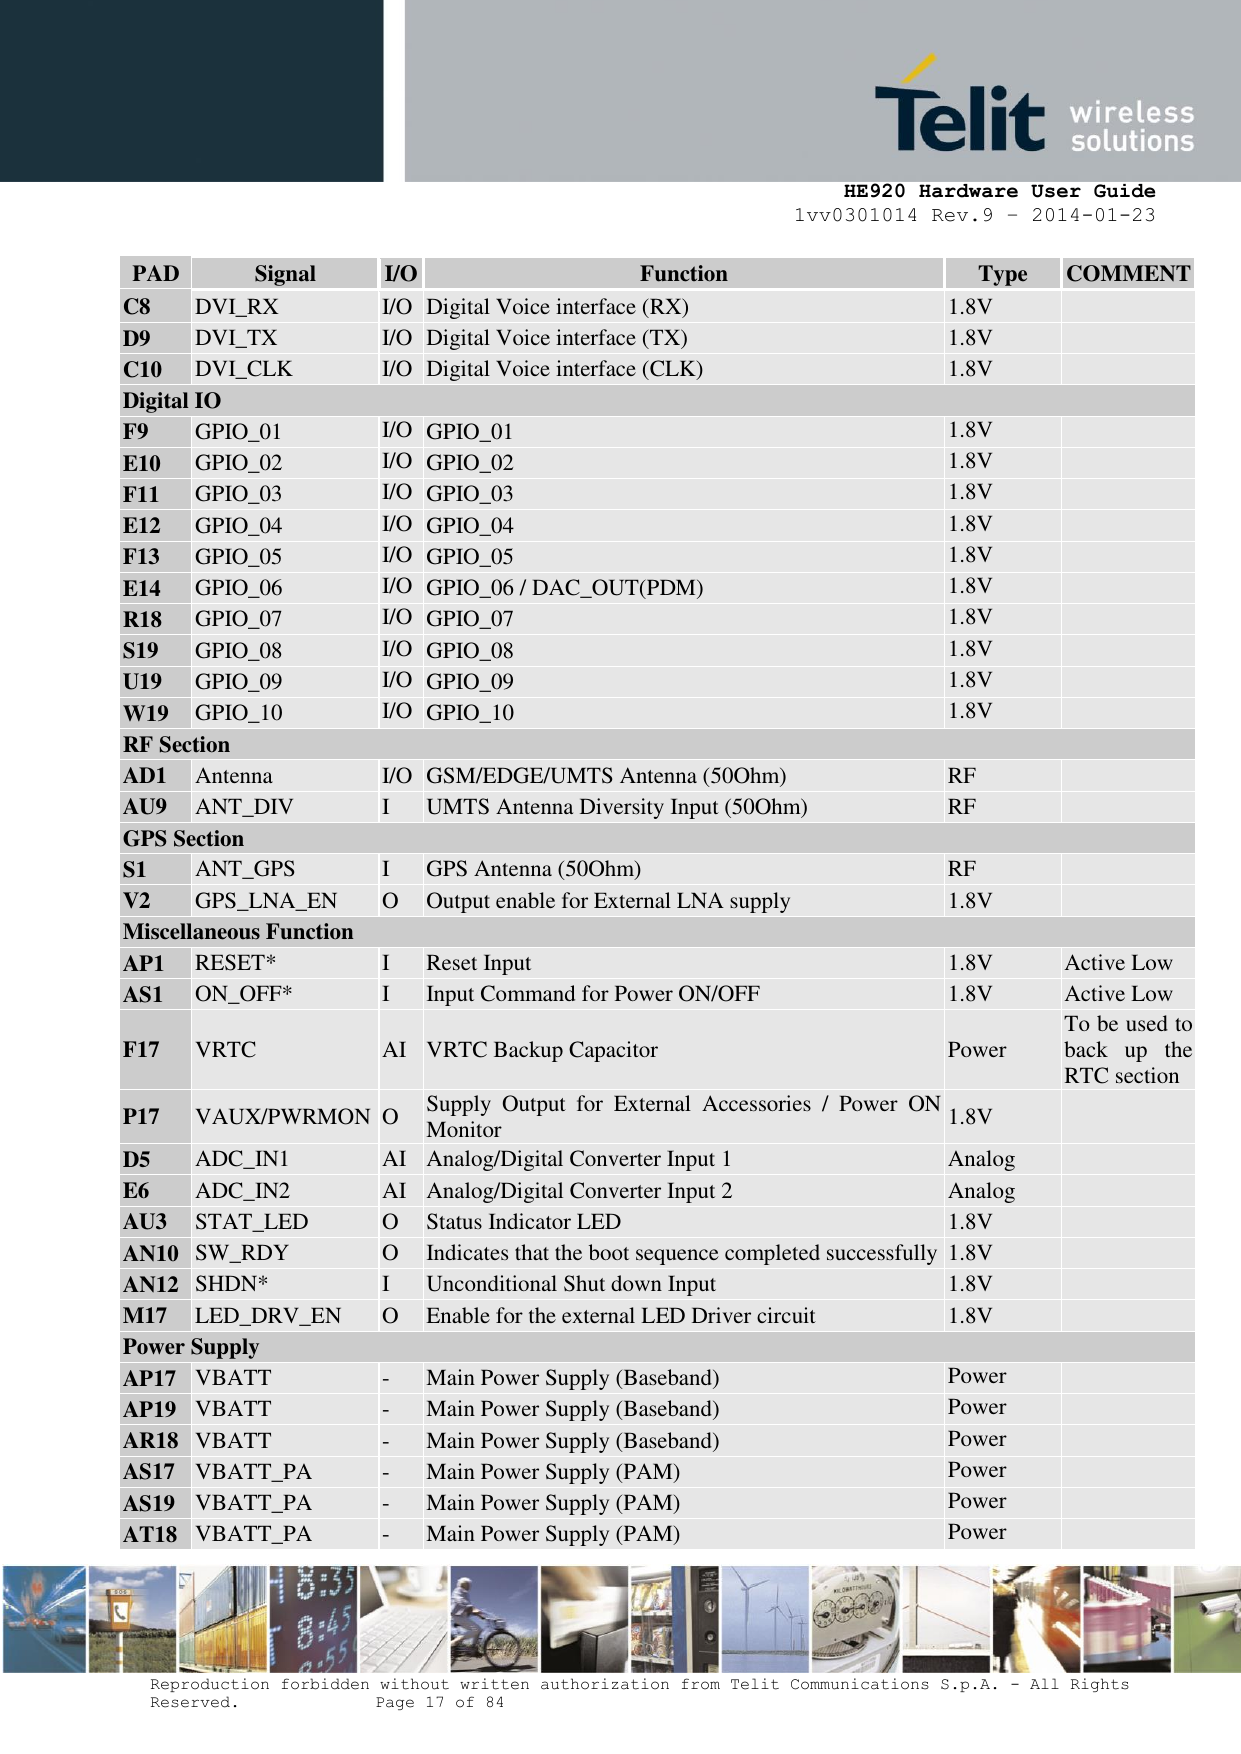     HE920 Hardware User Guide 1vv0301014 Rev.9 – 2014-01-23 Reproduction forbidden without written authorization from Telit Communications S.p.A. - All Rights Reserved.    Page 17 of 84  PAD Signal I/O Function Type COMMENT C8 DVI_RX I/O Digital Voice interface (RX) 1.8V  D9 DVI_TX I/O Digital Voice interface (TX) 1.8V  C10 DVI_CLK I/O Digital Voice interface (CLK) 1.8V  Digital IO F9 GPIO_01 I/O GPIO_01 1.8V  E10 GPIO_02 I/O GPIO_02 1.8V  F11 GPIO_03 I/O GPIO_03 1.8V  E12 GPIO_04 I/O GPIO_04 1.8V  F13 GPIO_05 I/O GPIO_05 1.8V  E14 GPIO_06 I/O GPIO_06 / DAC_OUT(PDM) 1.8V  R18 GPIO_07 I/O GPIO_07 1.8V  S19 GPIO_08 I/O GPIO_08 1.8V  U19 GPIO_09 I/O GPIO_09 1.8V  W19 GPIO_10 I/O GPIO_10 1.8V  RF Section AD1 Antenna I/O GSM/EDGE/UMTS Antenna (50Ohm) RF  AU9 ANT_DIV I UMTS Antenna Diversity Input (50Ohm) RF  GPS Section S1 ANT_GPS I GPS Antenna (50Ohm) RF  V2 GPS_LNA_EN O Output enable for External LNA supply 1.8V  Miscellaneous Function AP1 RESET* I Reset Input 1.8V Active Low AS1 ON_OFF* I Input Command for Power ON/OFF 1.8V Active Low F17 VRTC AI VRTC Backup Capacitor Power To be used to back  up  the RTC section P17 VAUX/PWRMON O Supply  Output  for  External  Accessories  /  Power  ON Monitor 1.8V  D5 ADC_IN1 AI Analog/Digital Converter Input 1 Analog  E6 ADC_IN2 AI Analog/Digital Converter Input 2 Analog  AU3 STAT_LED O Status Indicator LED 1.8V  AN10 SW_RDY O Indicates that the boot sequence completed successfully 1.8V  AN12 SHDN* I Unconditional Shut down Input 1.8V  M17 LED_DRV_EN O Enable for the external LED Driver circuit 1.8V  Power Supply AP17 VBATT - Main Power Supply (Baseband) Power  AP19 VBATT - Main Power Supply (Baseband) Power  AR18 VBATT - Main Power Supply (Baseband) Power  AS17 VBATT_PA - Main Power Supply (PAM) Power  AS19 VBATT_PA - Main Power Supply (PAM) Power  AT18 VBATT_PA - Main Power Supply (PAM) Power  